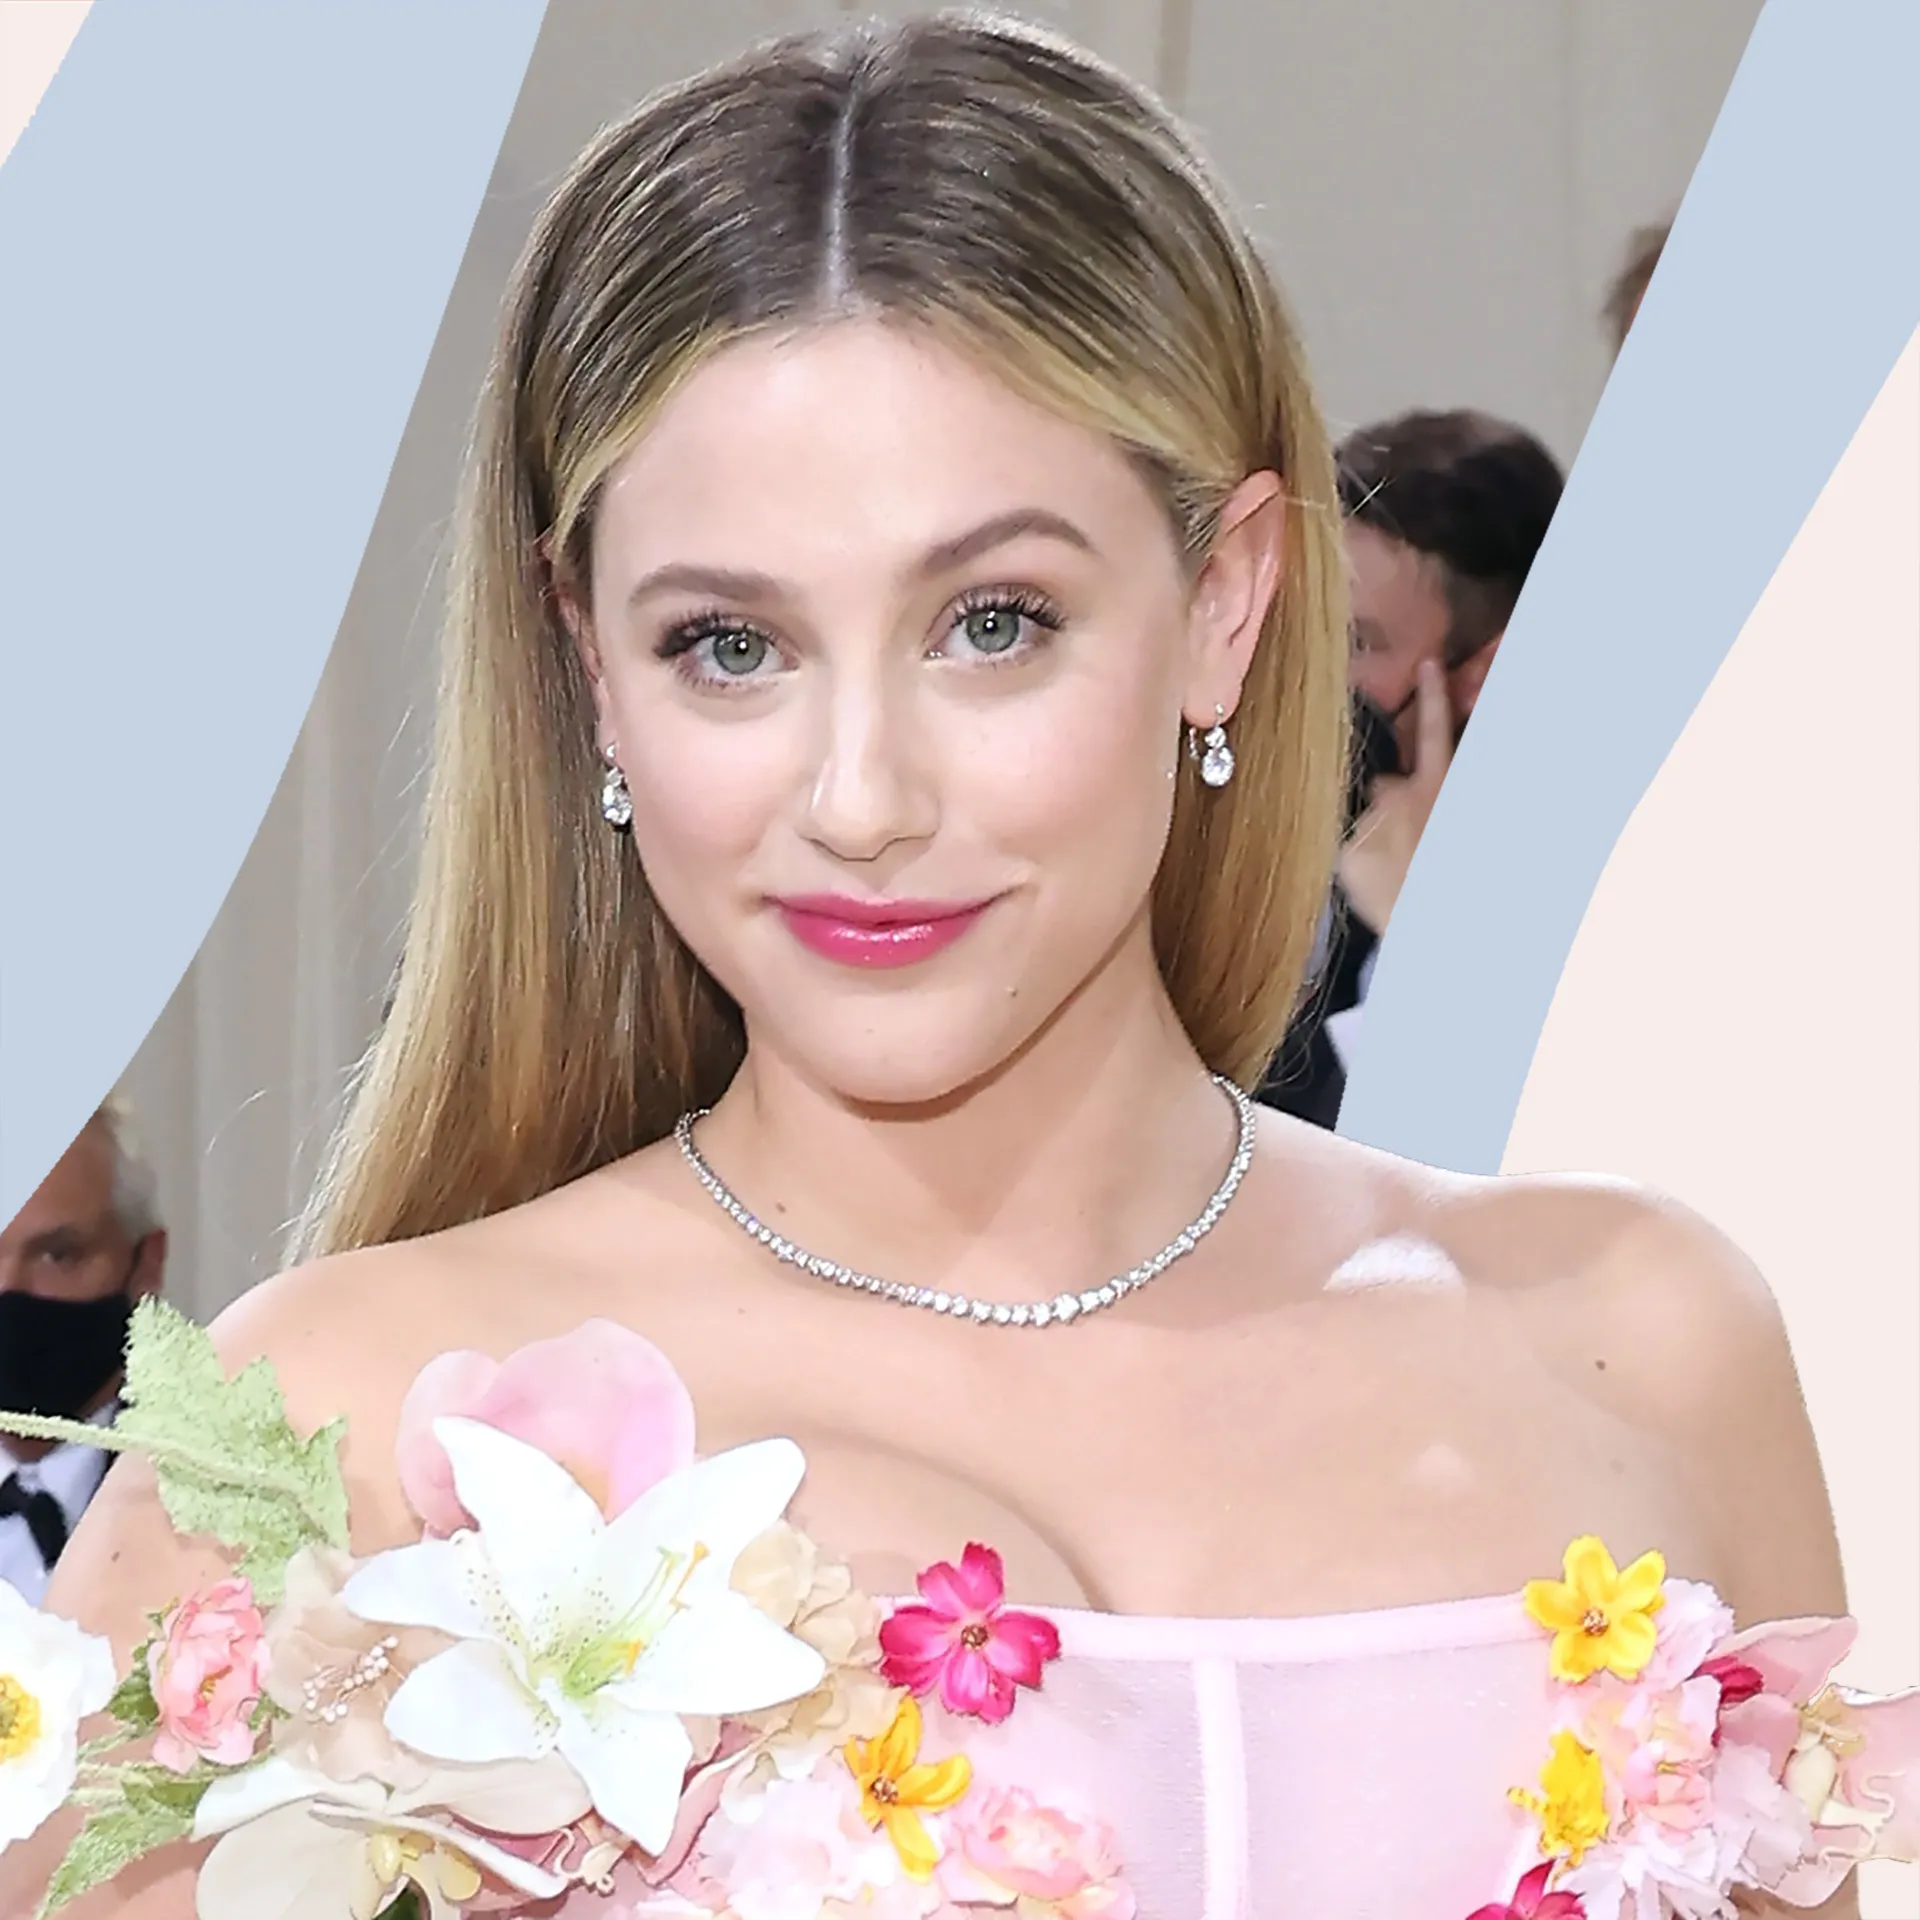 Lili Reinhart openly advocates for body positivity